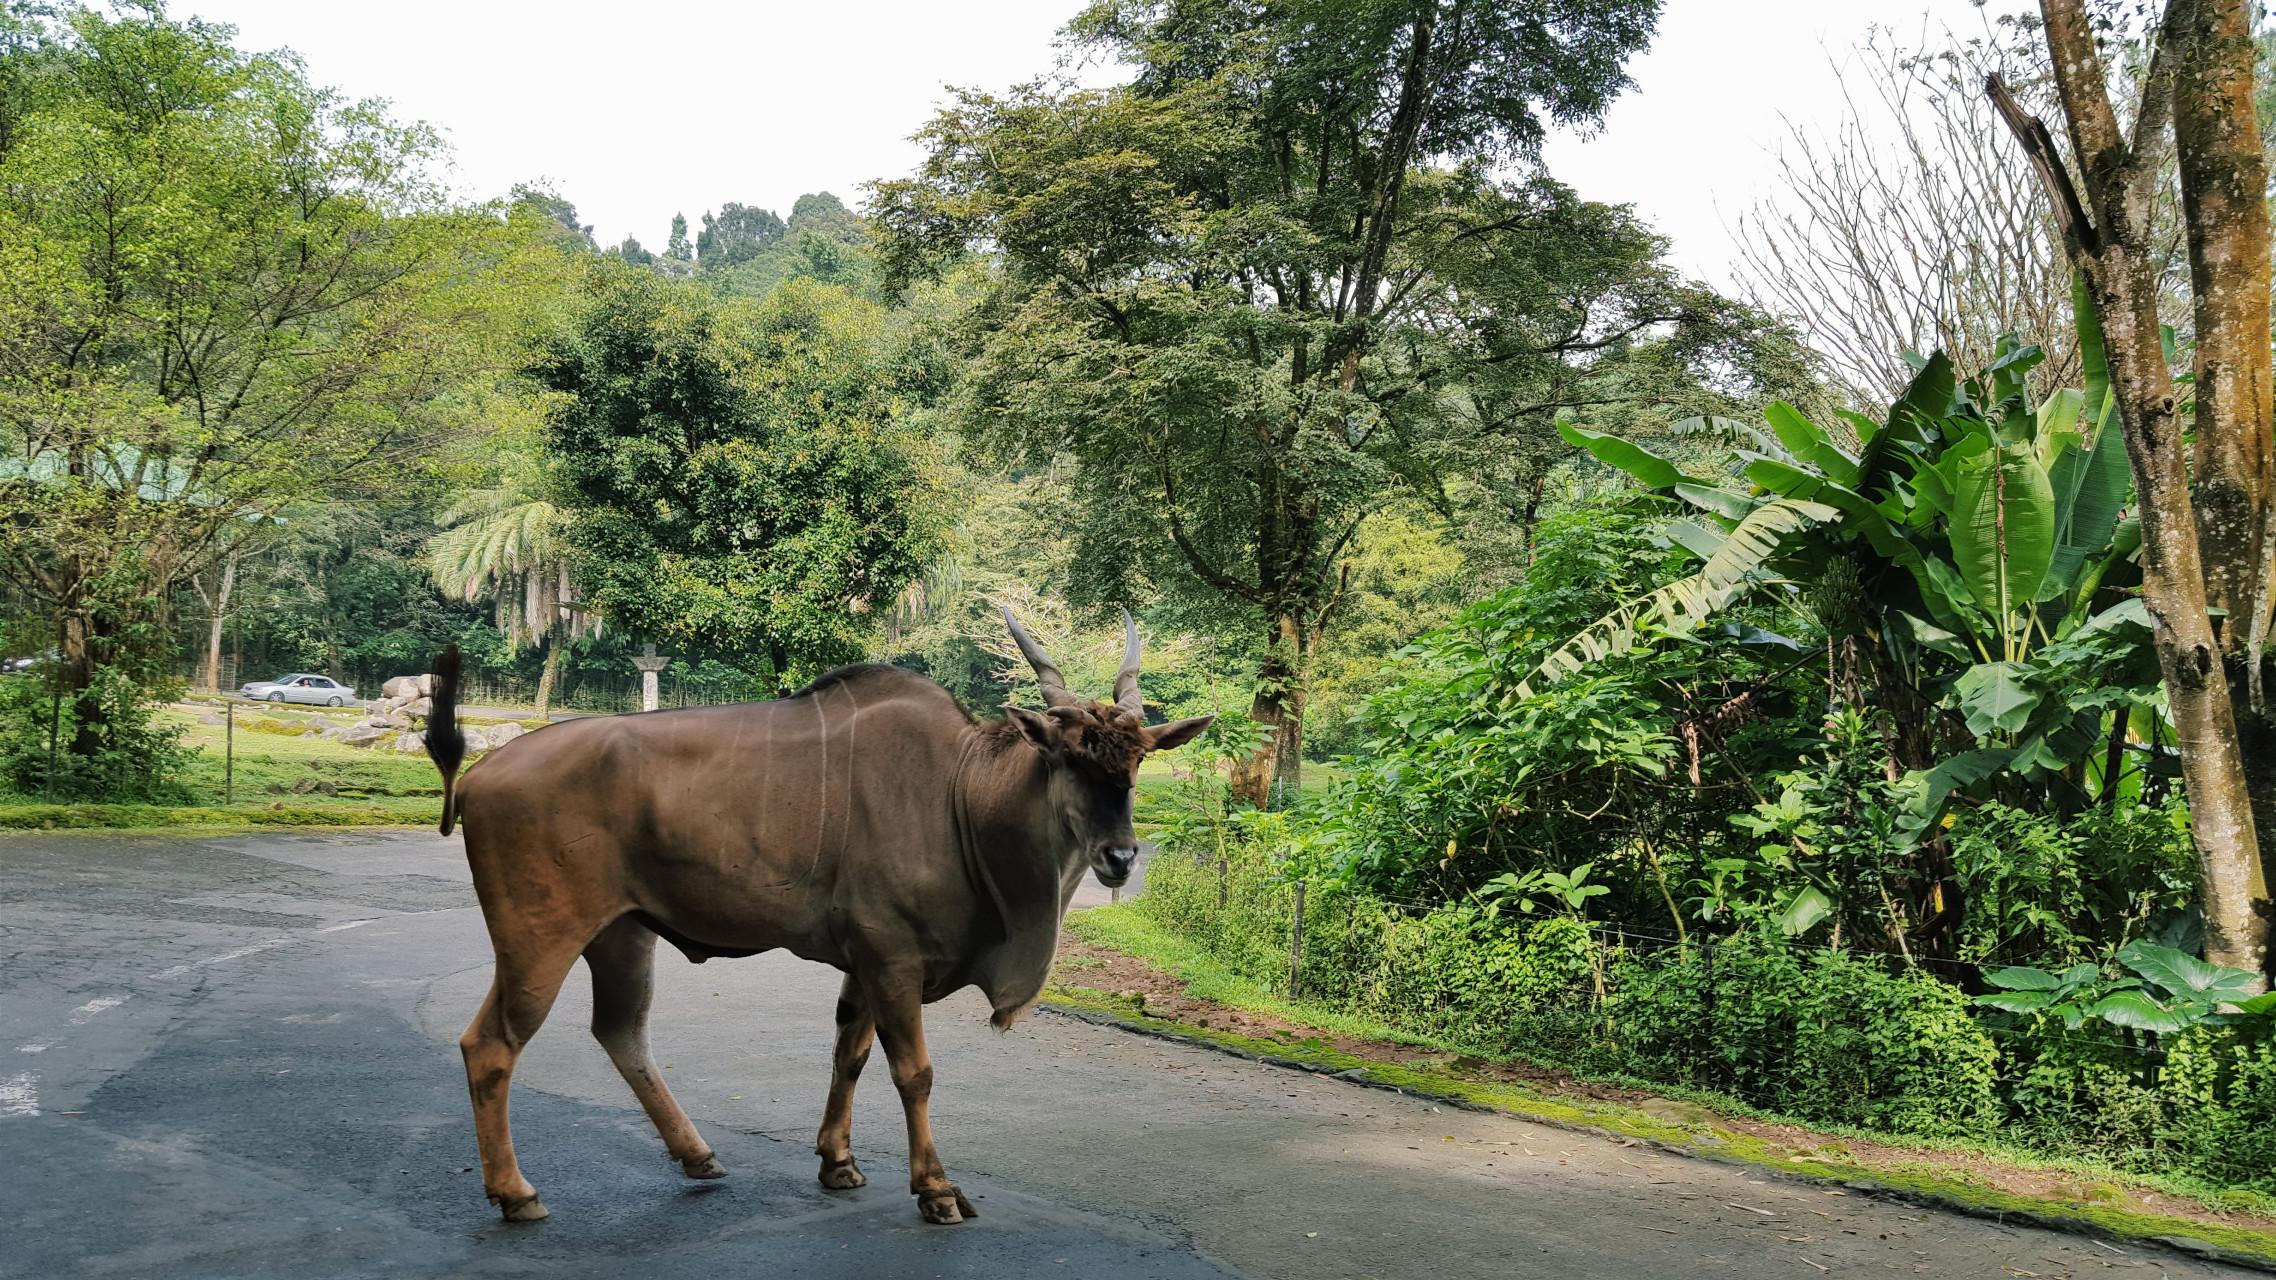 The pandemic was a break for animals to cross roads freely